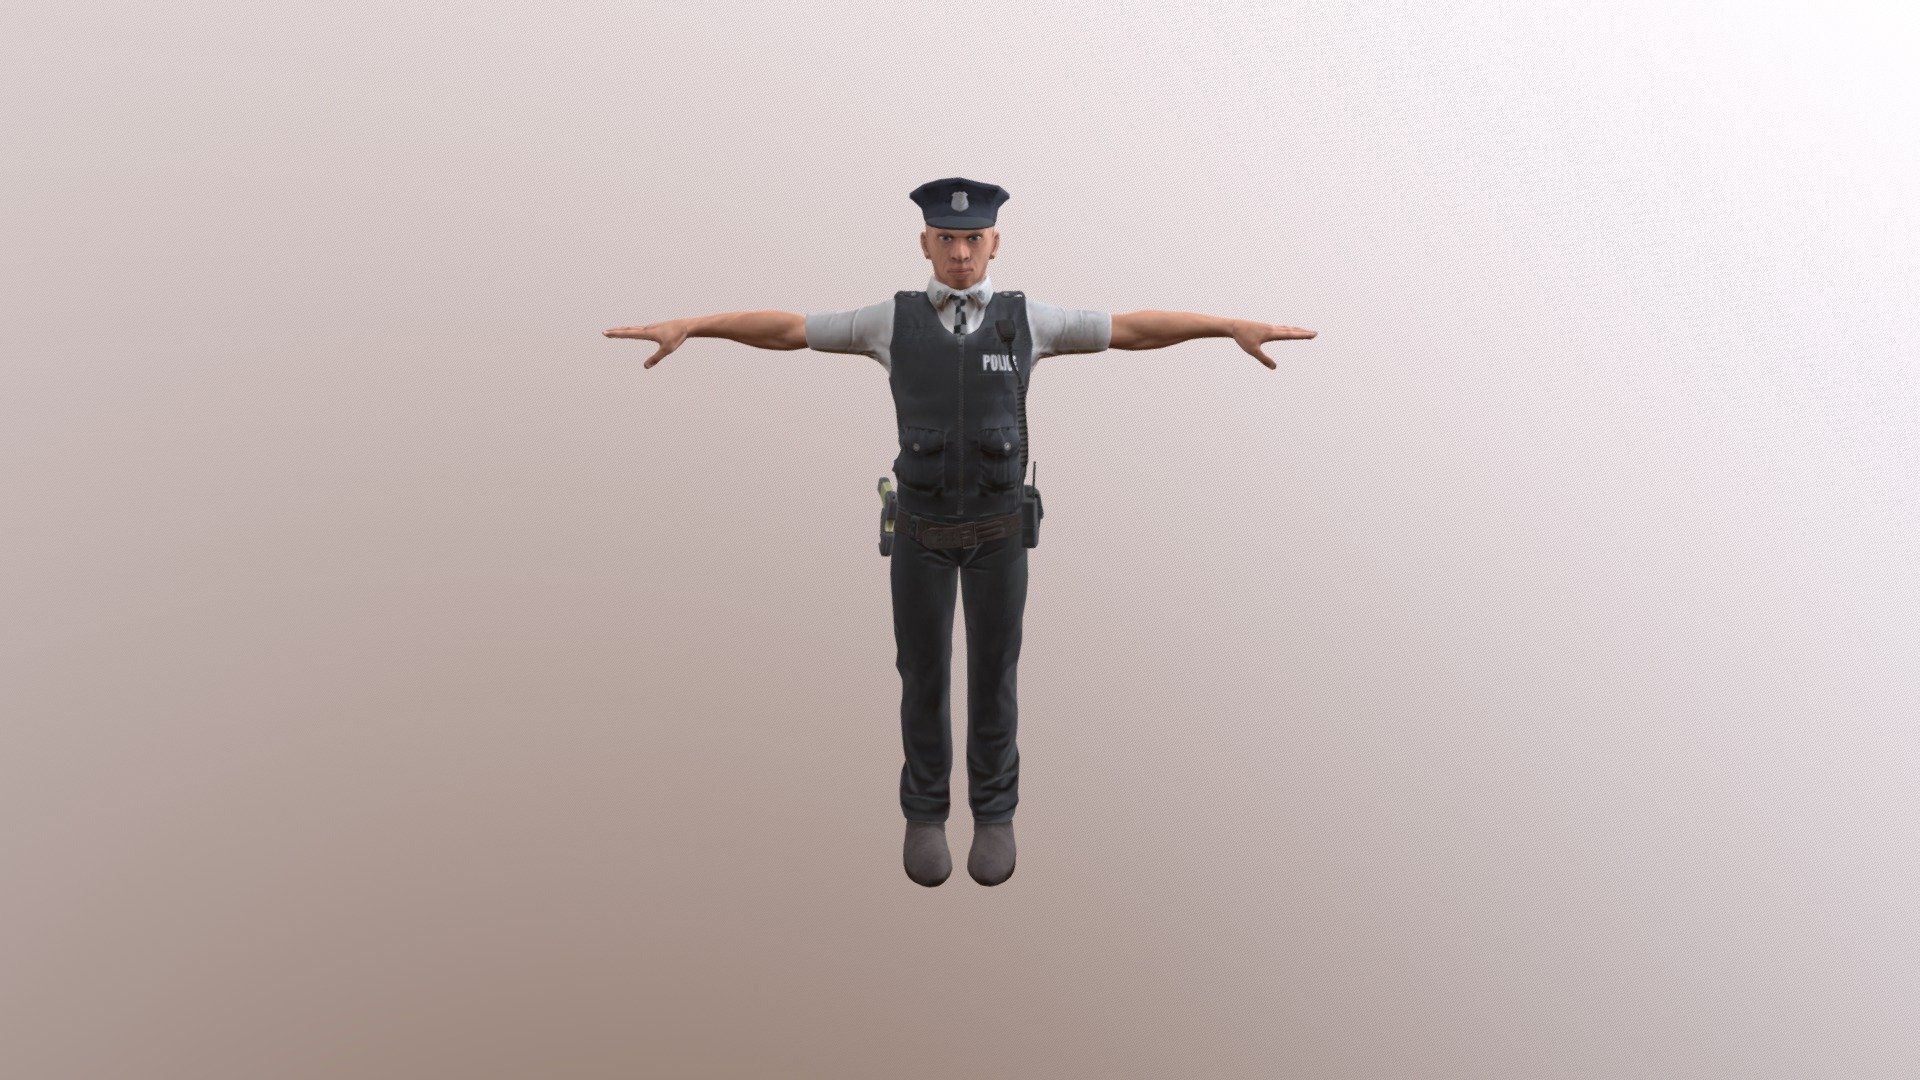 Police 2 Buy Royalty Free 3d Model By Learnasimakeit Xboxcopy 97639e0 Sketchfab Store 